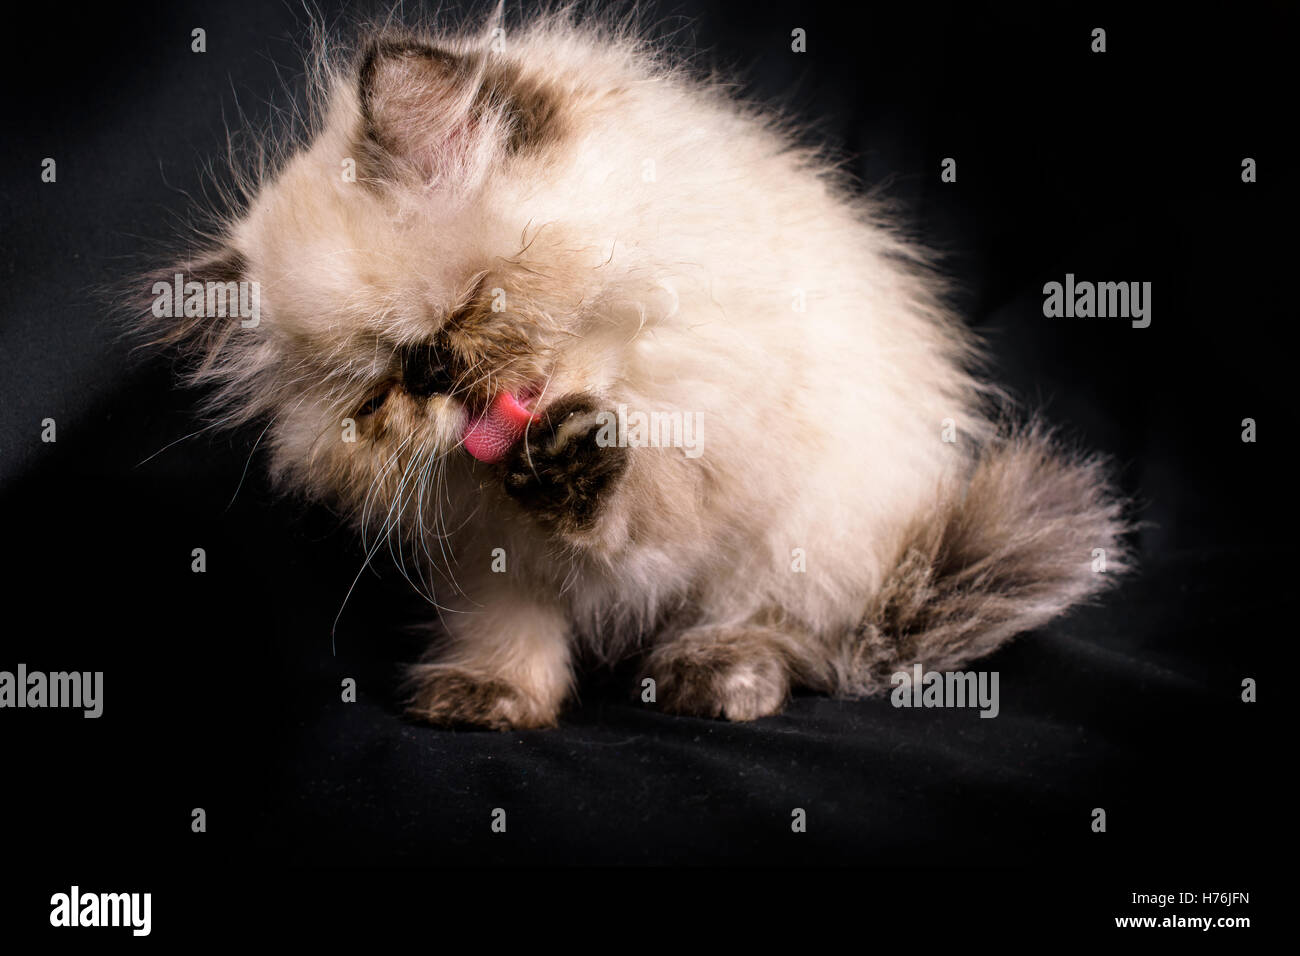 A young, two month old Blue Point Himalayan Persian kitten cleaning itself on a black background Stock Photo